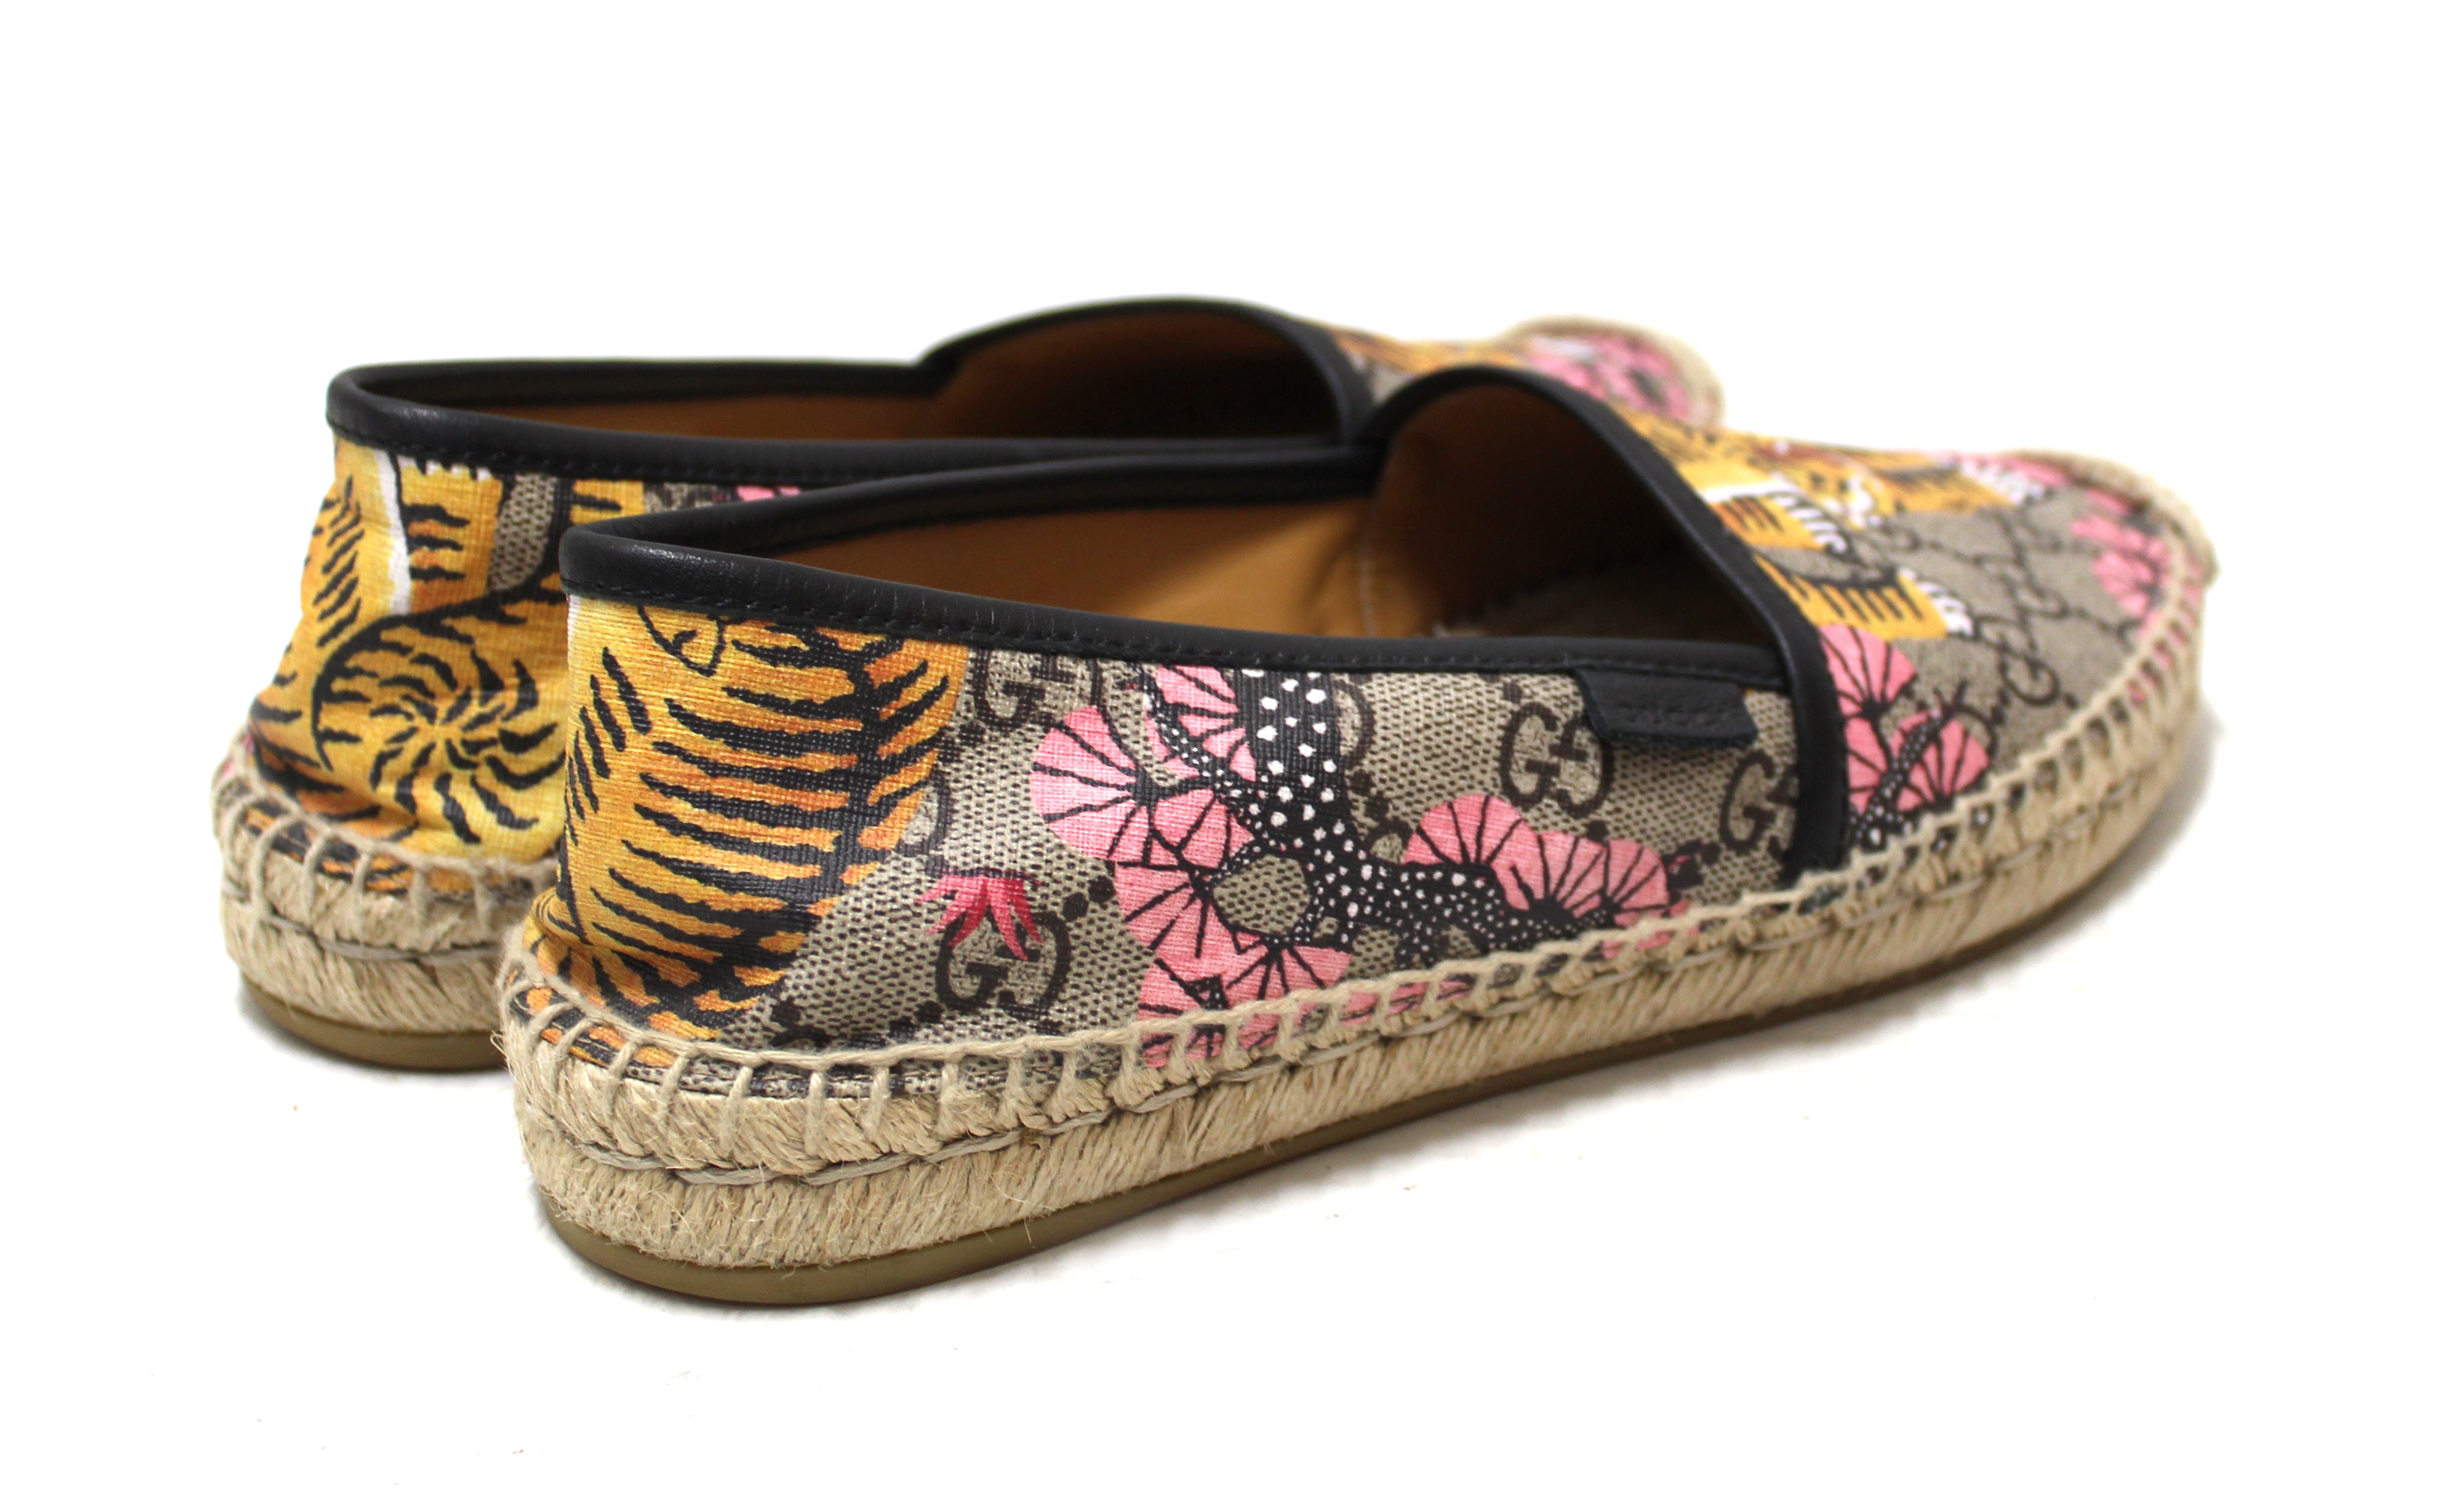 Authentic Gucci Tiger Bengal GG coated Canvas Espadrille Loafer Flats Shoes Size 37